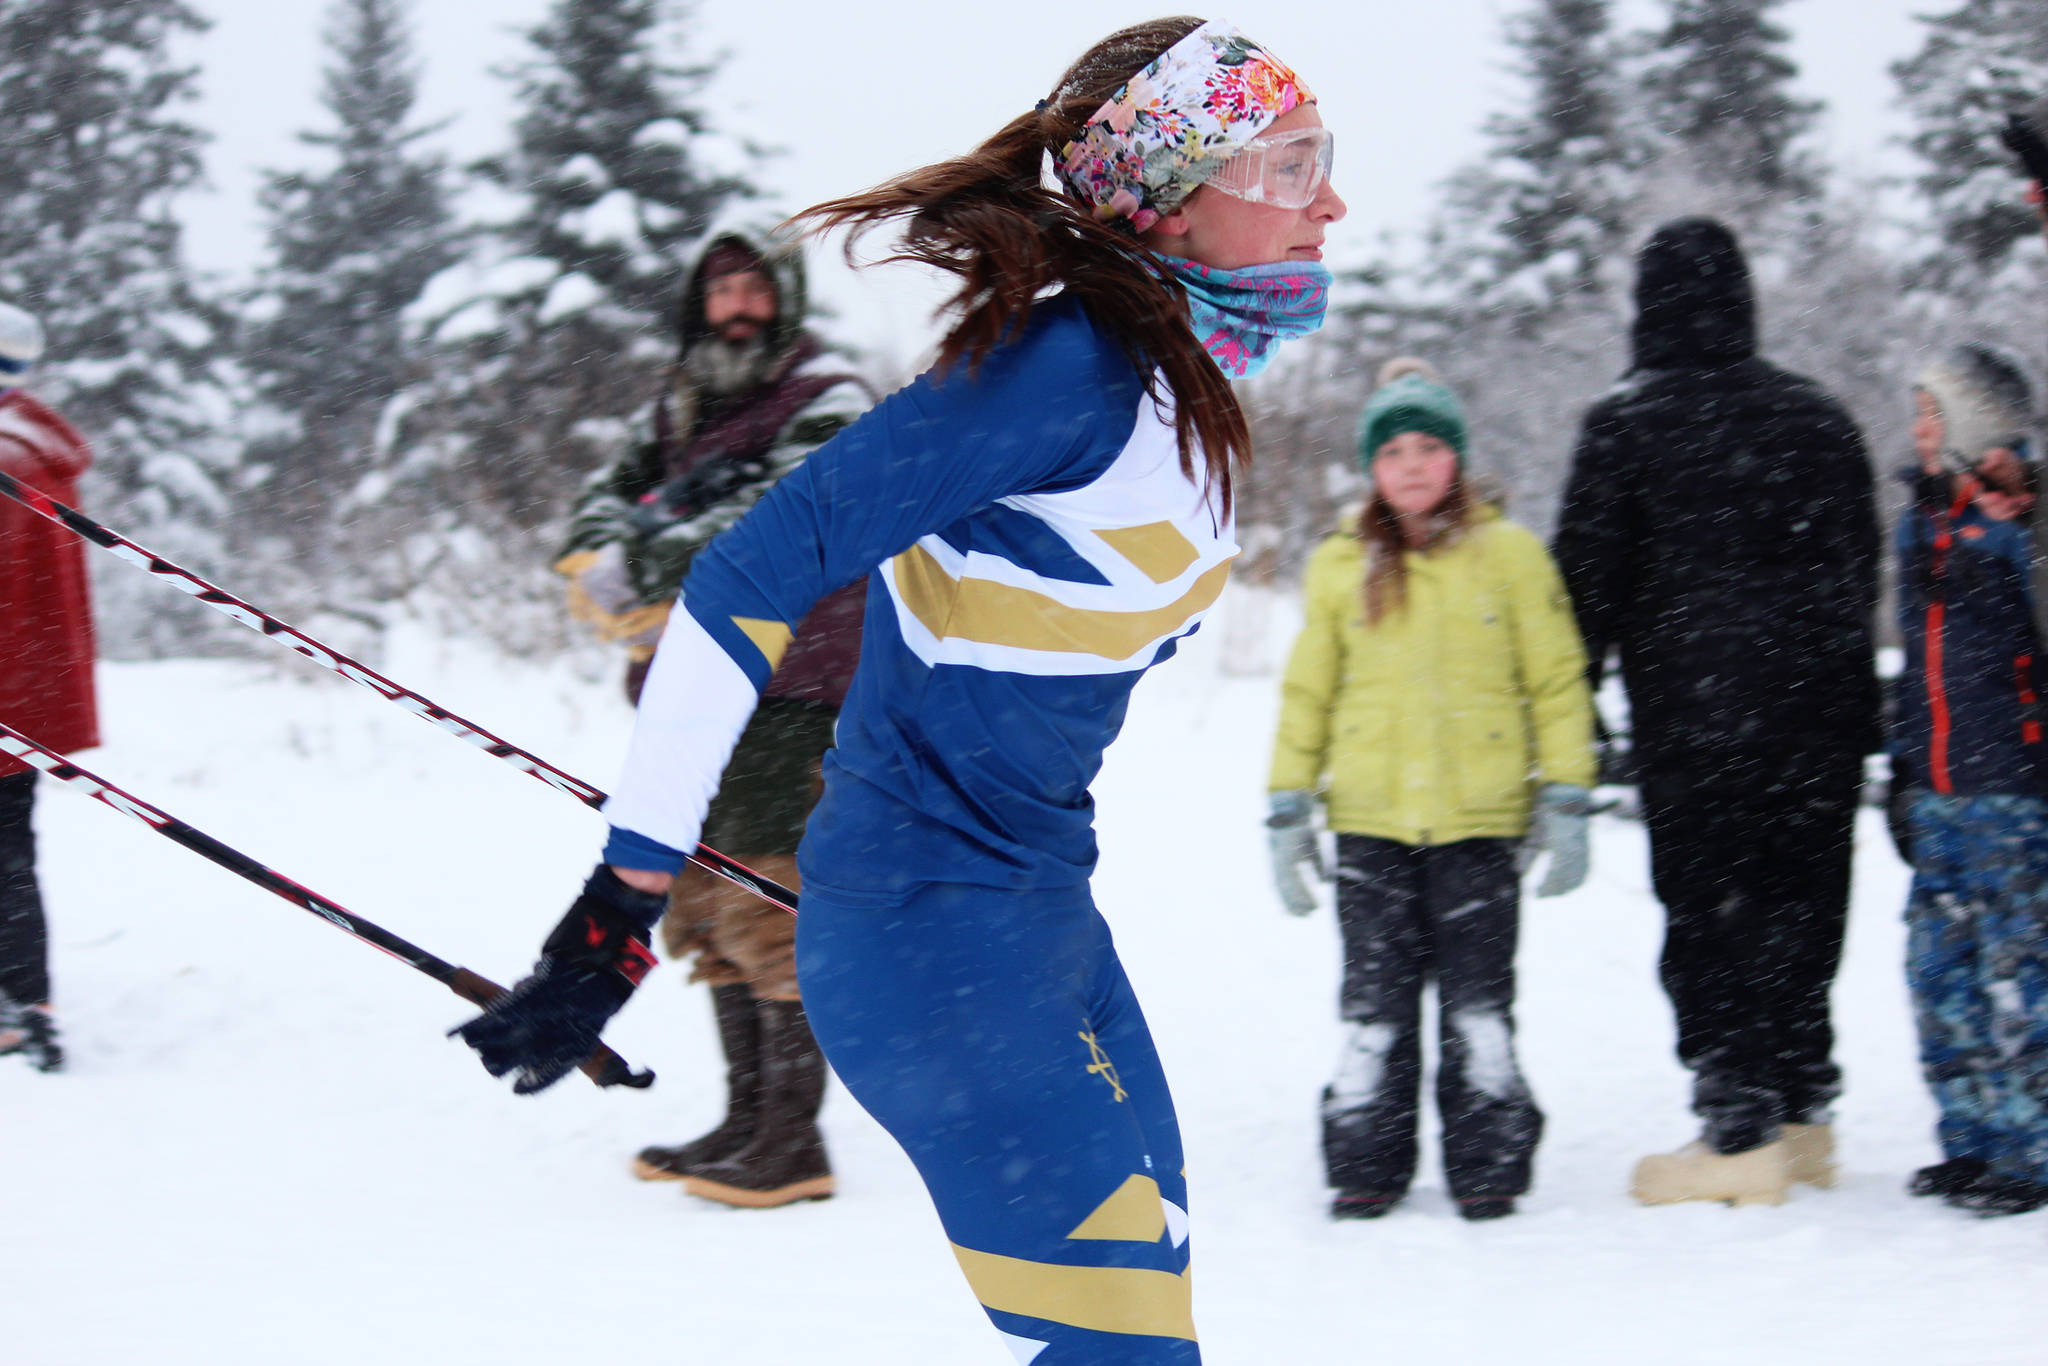 Homer junior Autumn Daigle breezes across the finish line to take first place in the girls’ race at a Homer-hosted ski meet Friday, Dec. 14, 2018 at the Ohlson Mountain Trails near Homer, Alaska. The meet was moved to Homer after it was decided the Tsalteshi Trails system in Soldotna didn’t have enough snow. (Photo by Megan Pacer/Homer News)